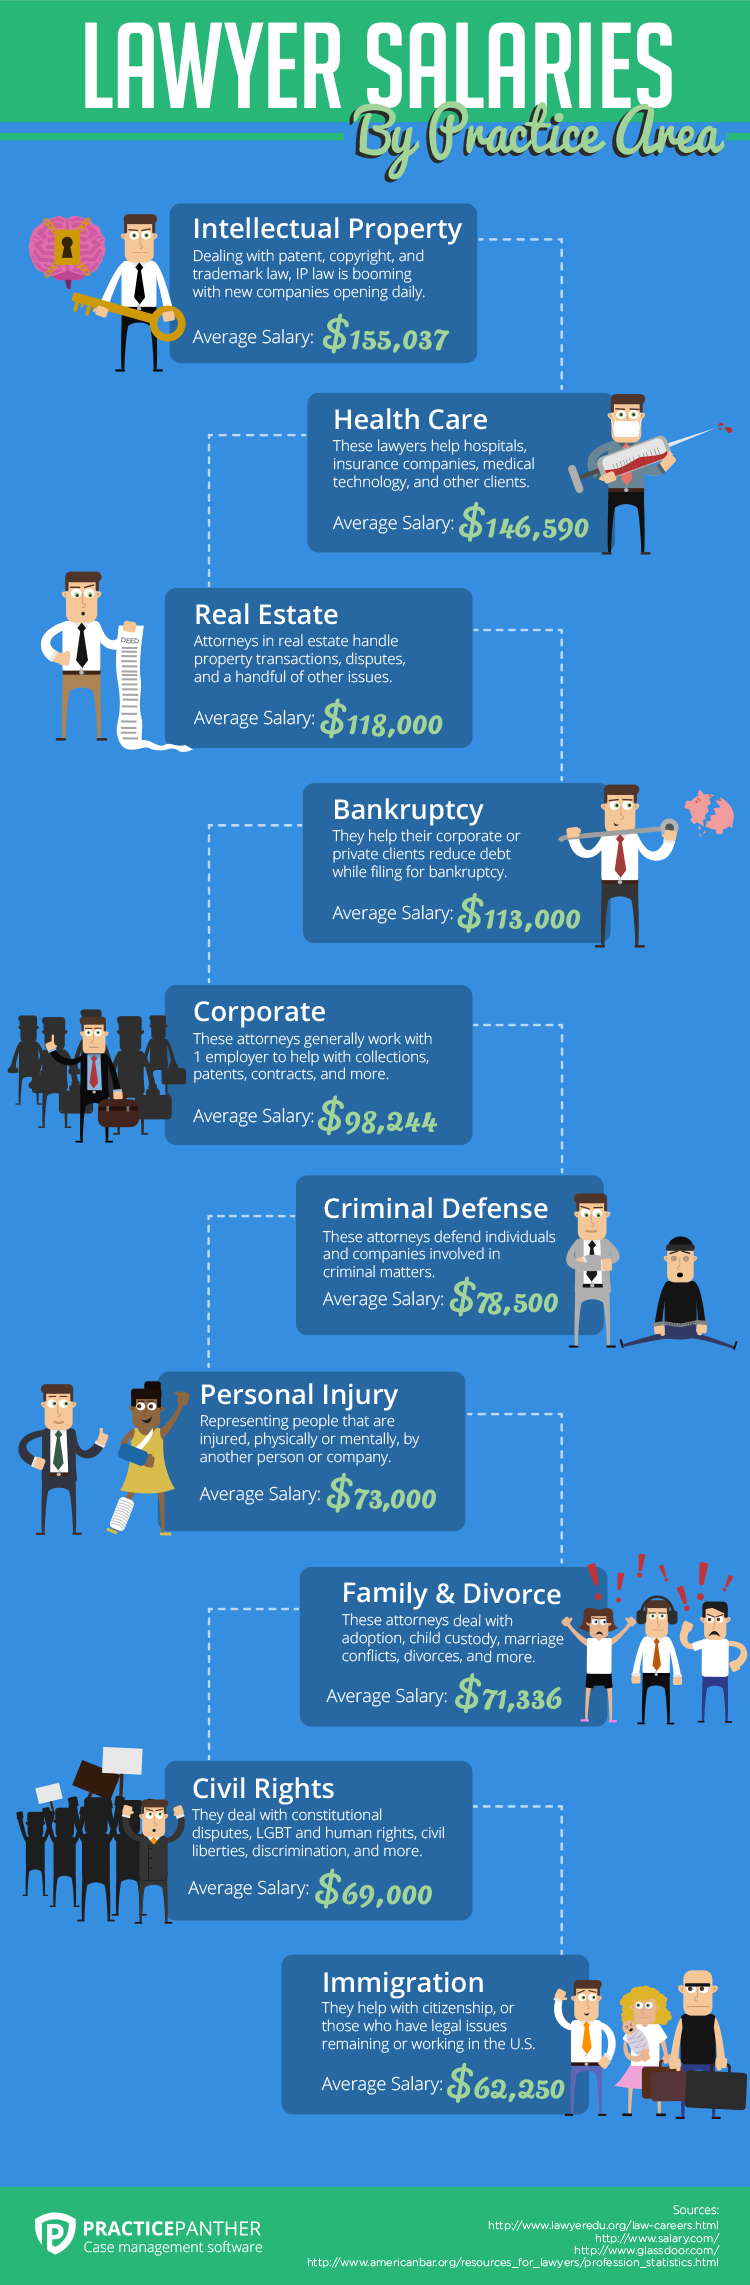 Lawyer-Salaries-Infographic-by-PracticePanther